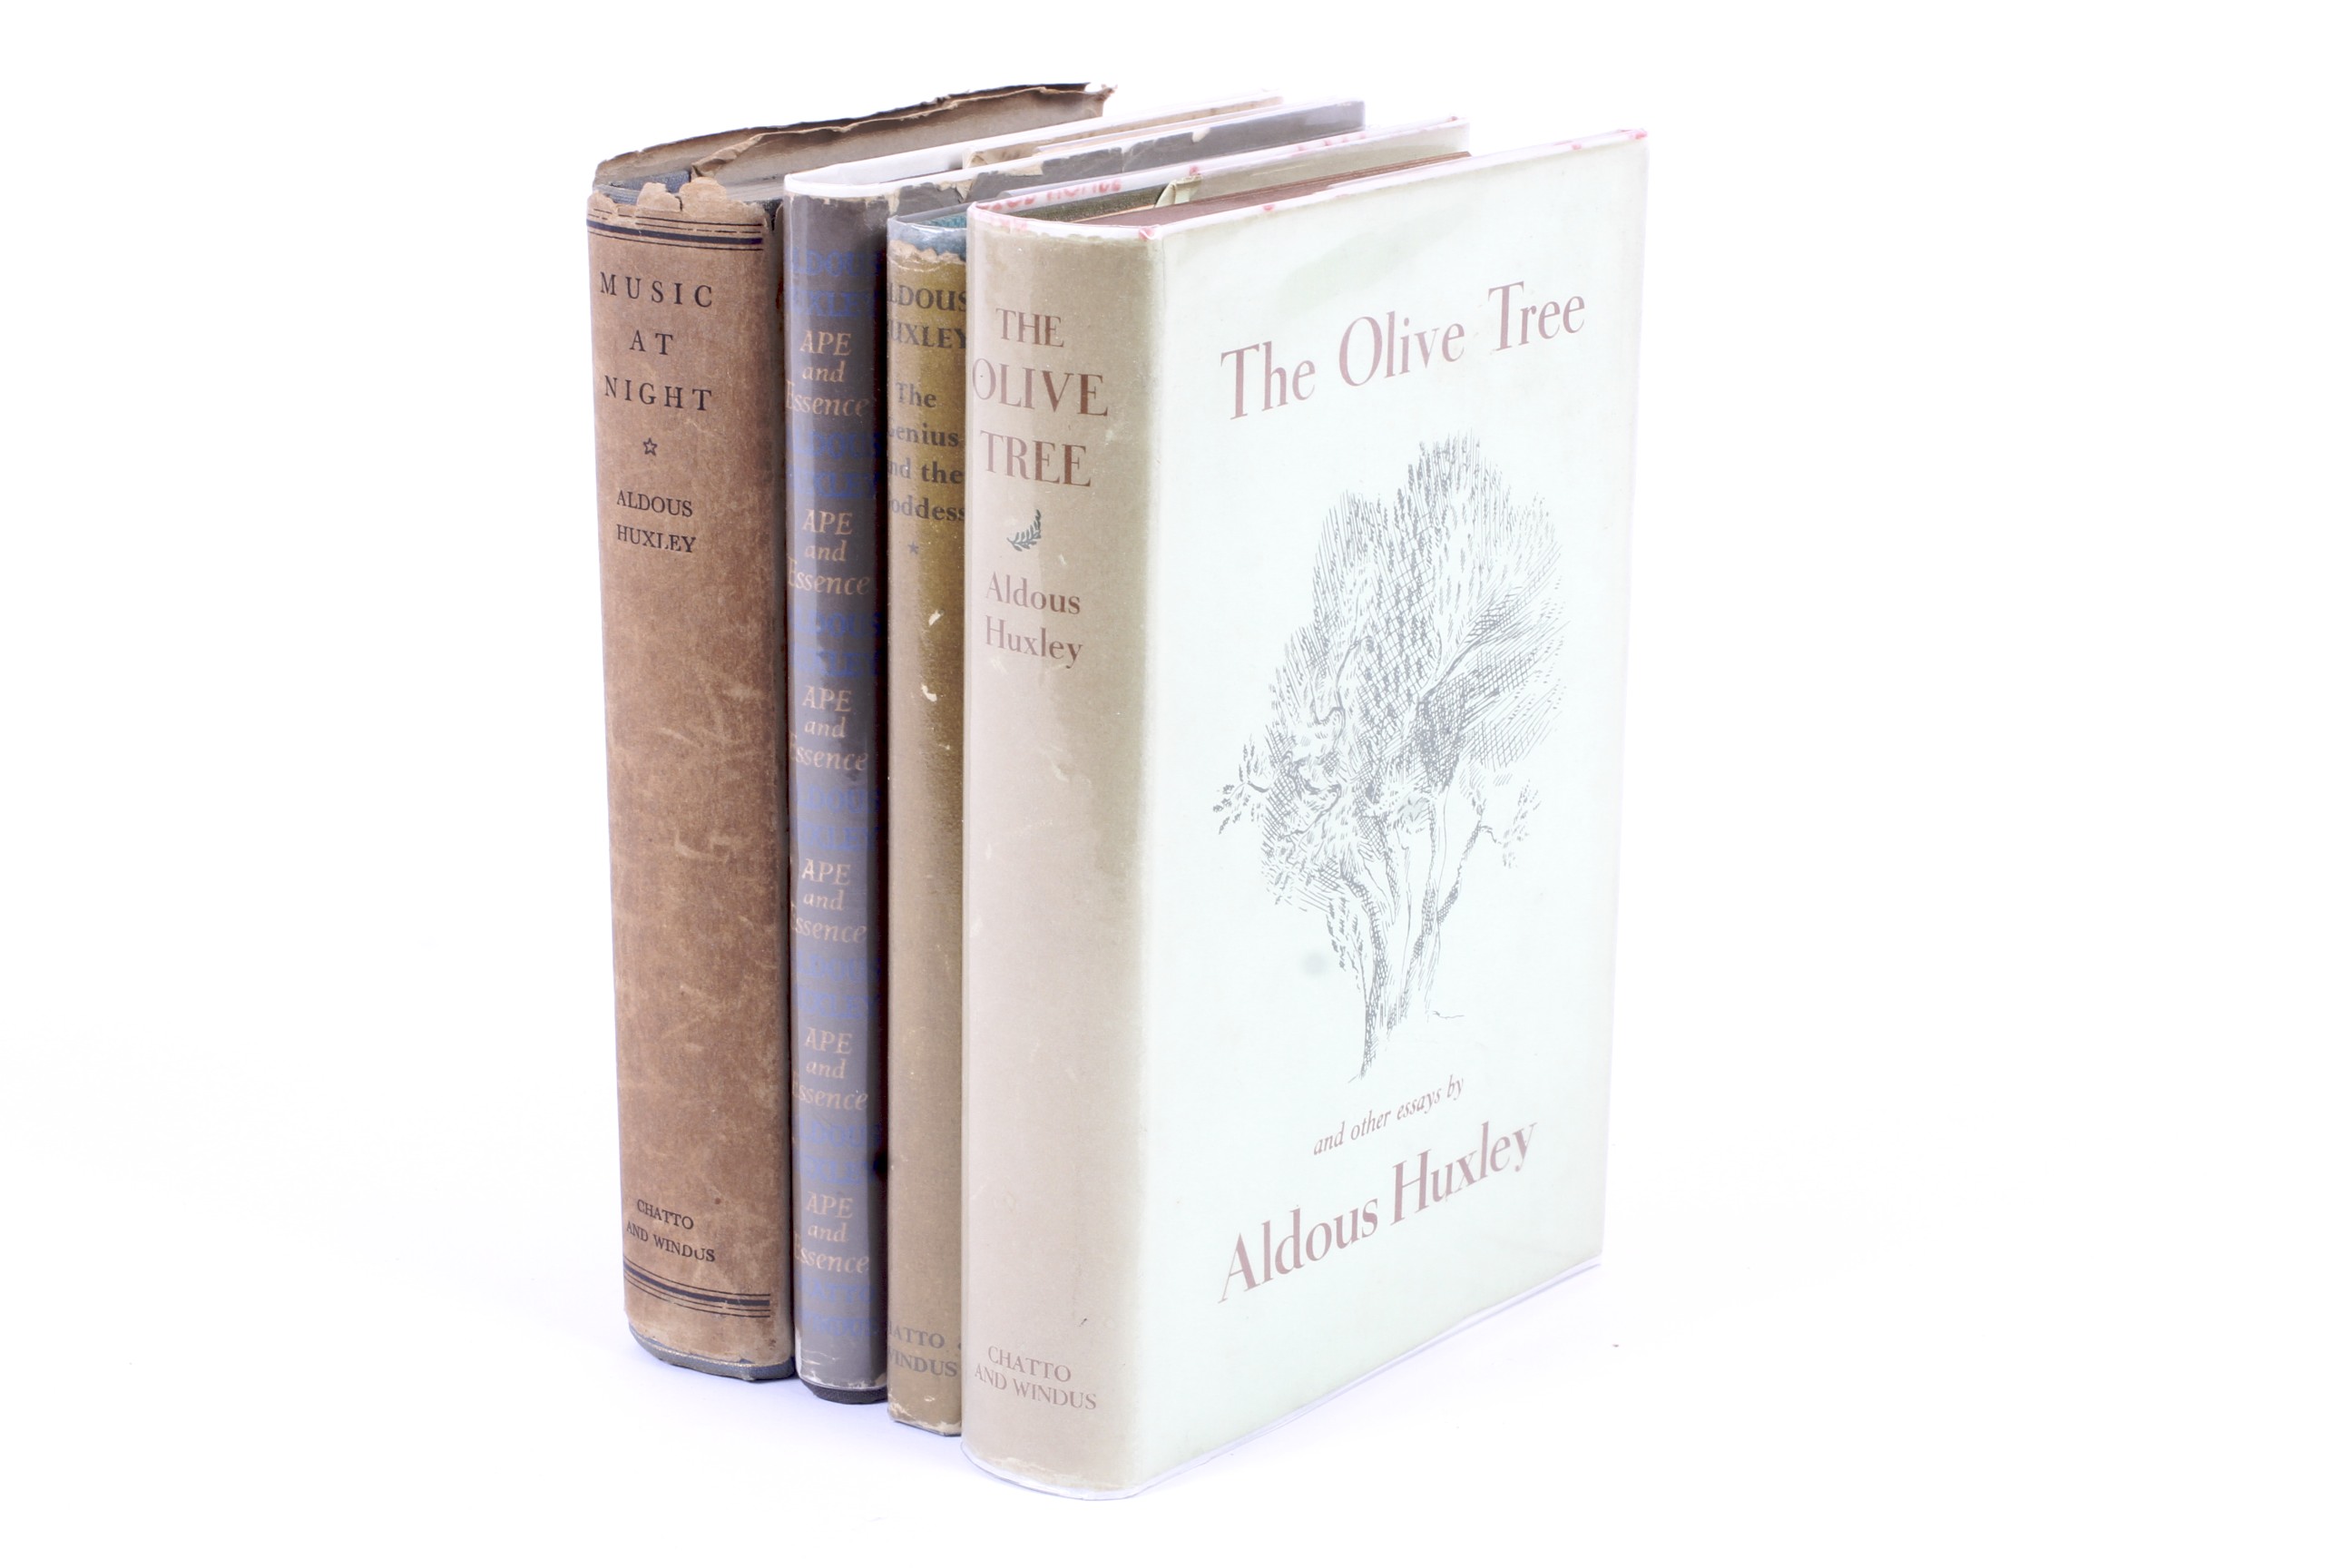 Aldous Huxley: Music at Night. Chatto and Windus 1931; A Huxley The Olive Tree.